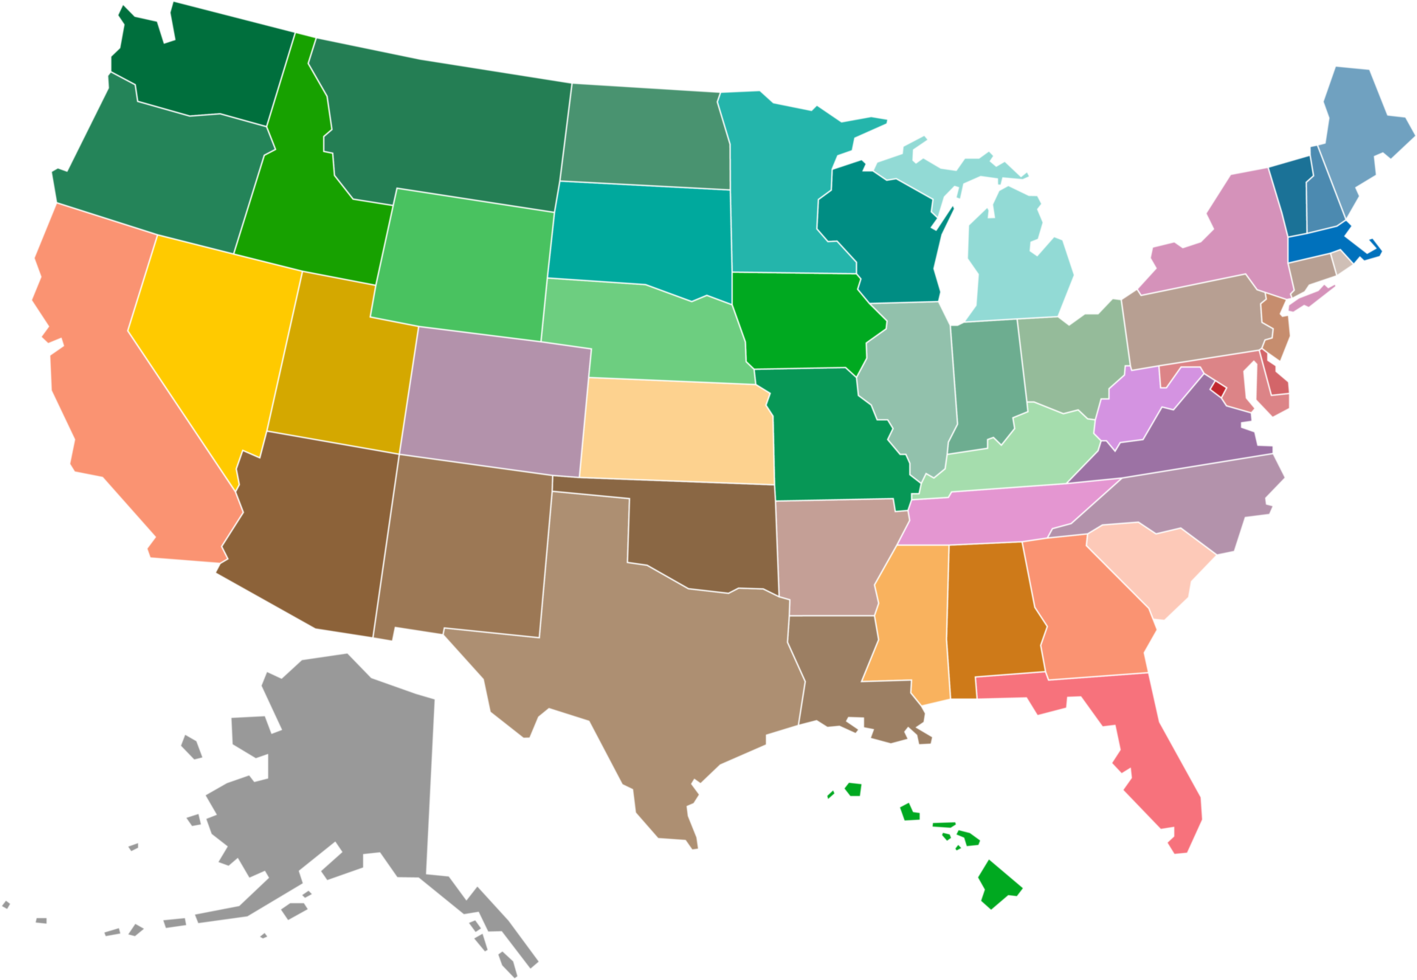 United States of America political map png